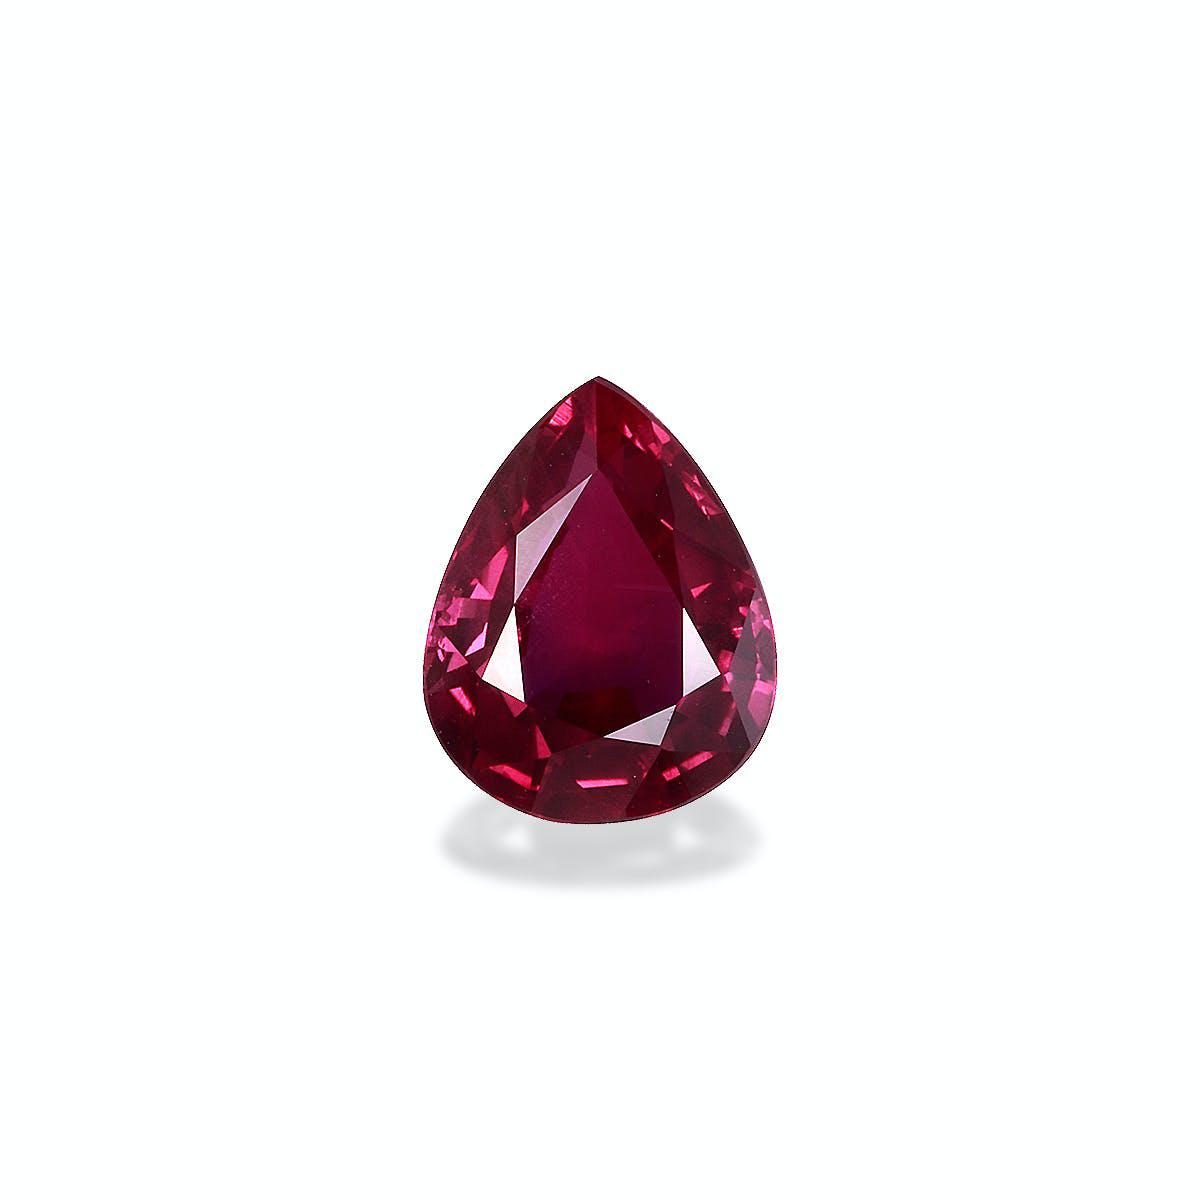 Picture of Unheated Mozambique Ruby 2.08ct - 9x7mm (S6-23)